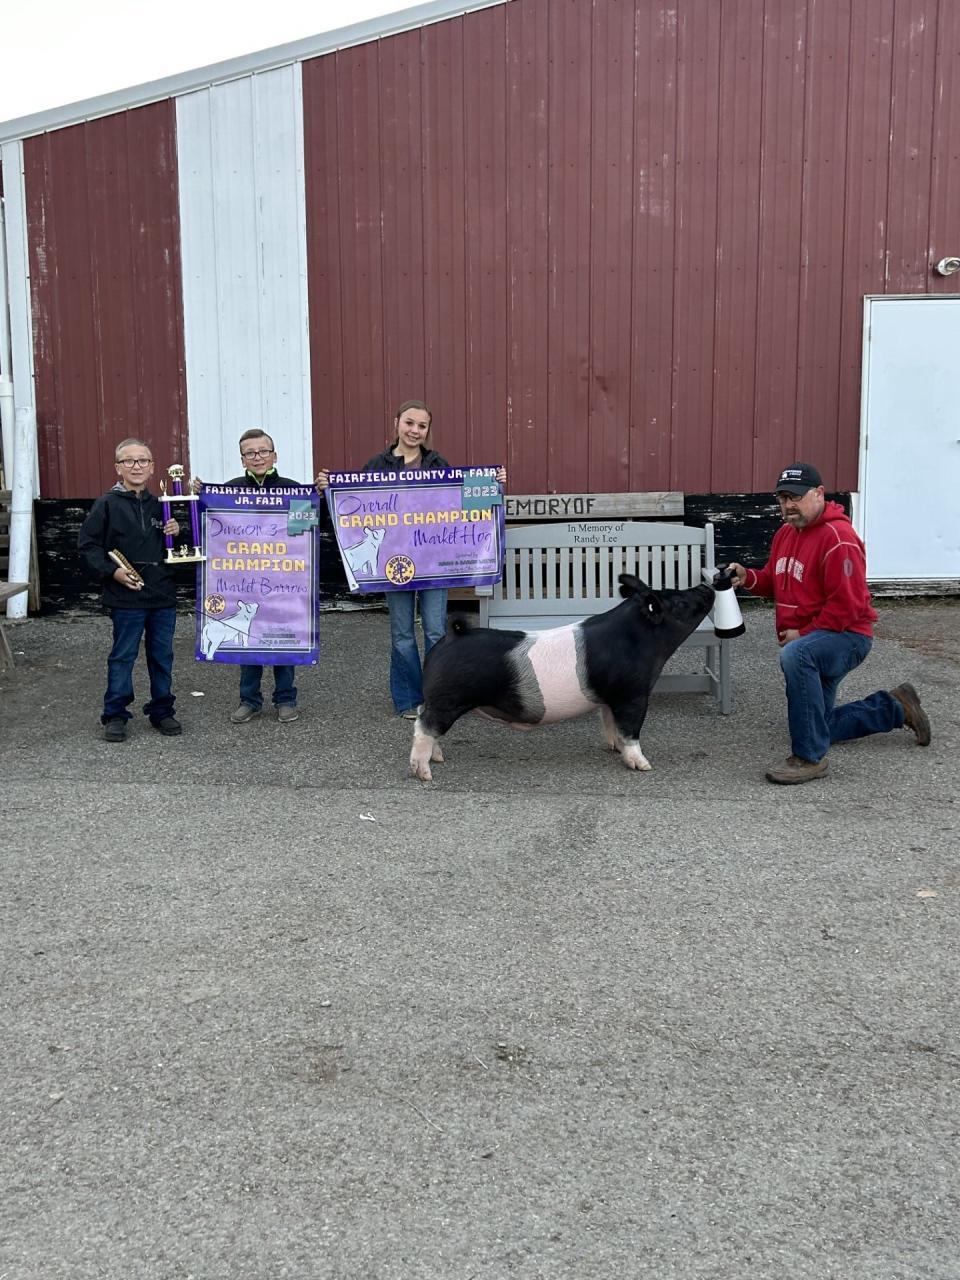 The Lee family stand with Grand Champion Hog Scoob beside a memorial bench dedicated to Randy Lee.